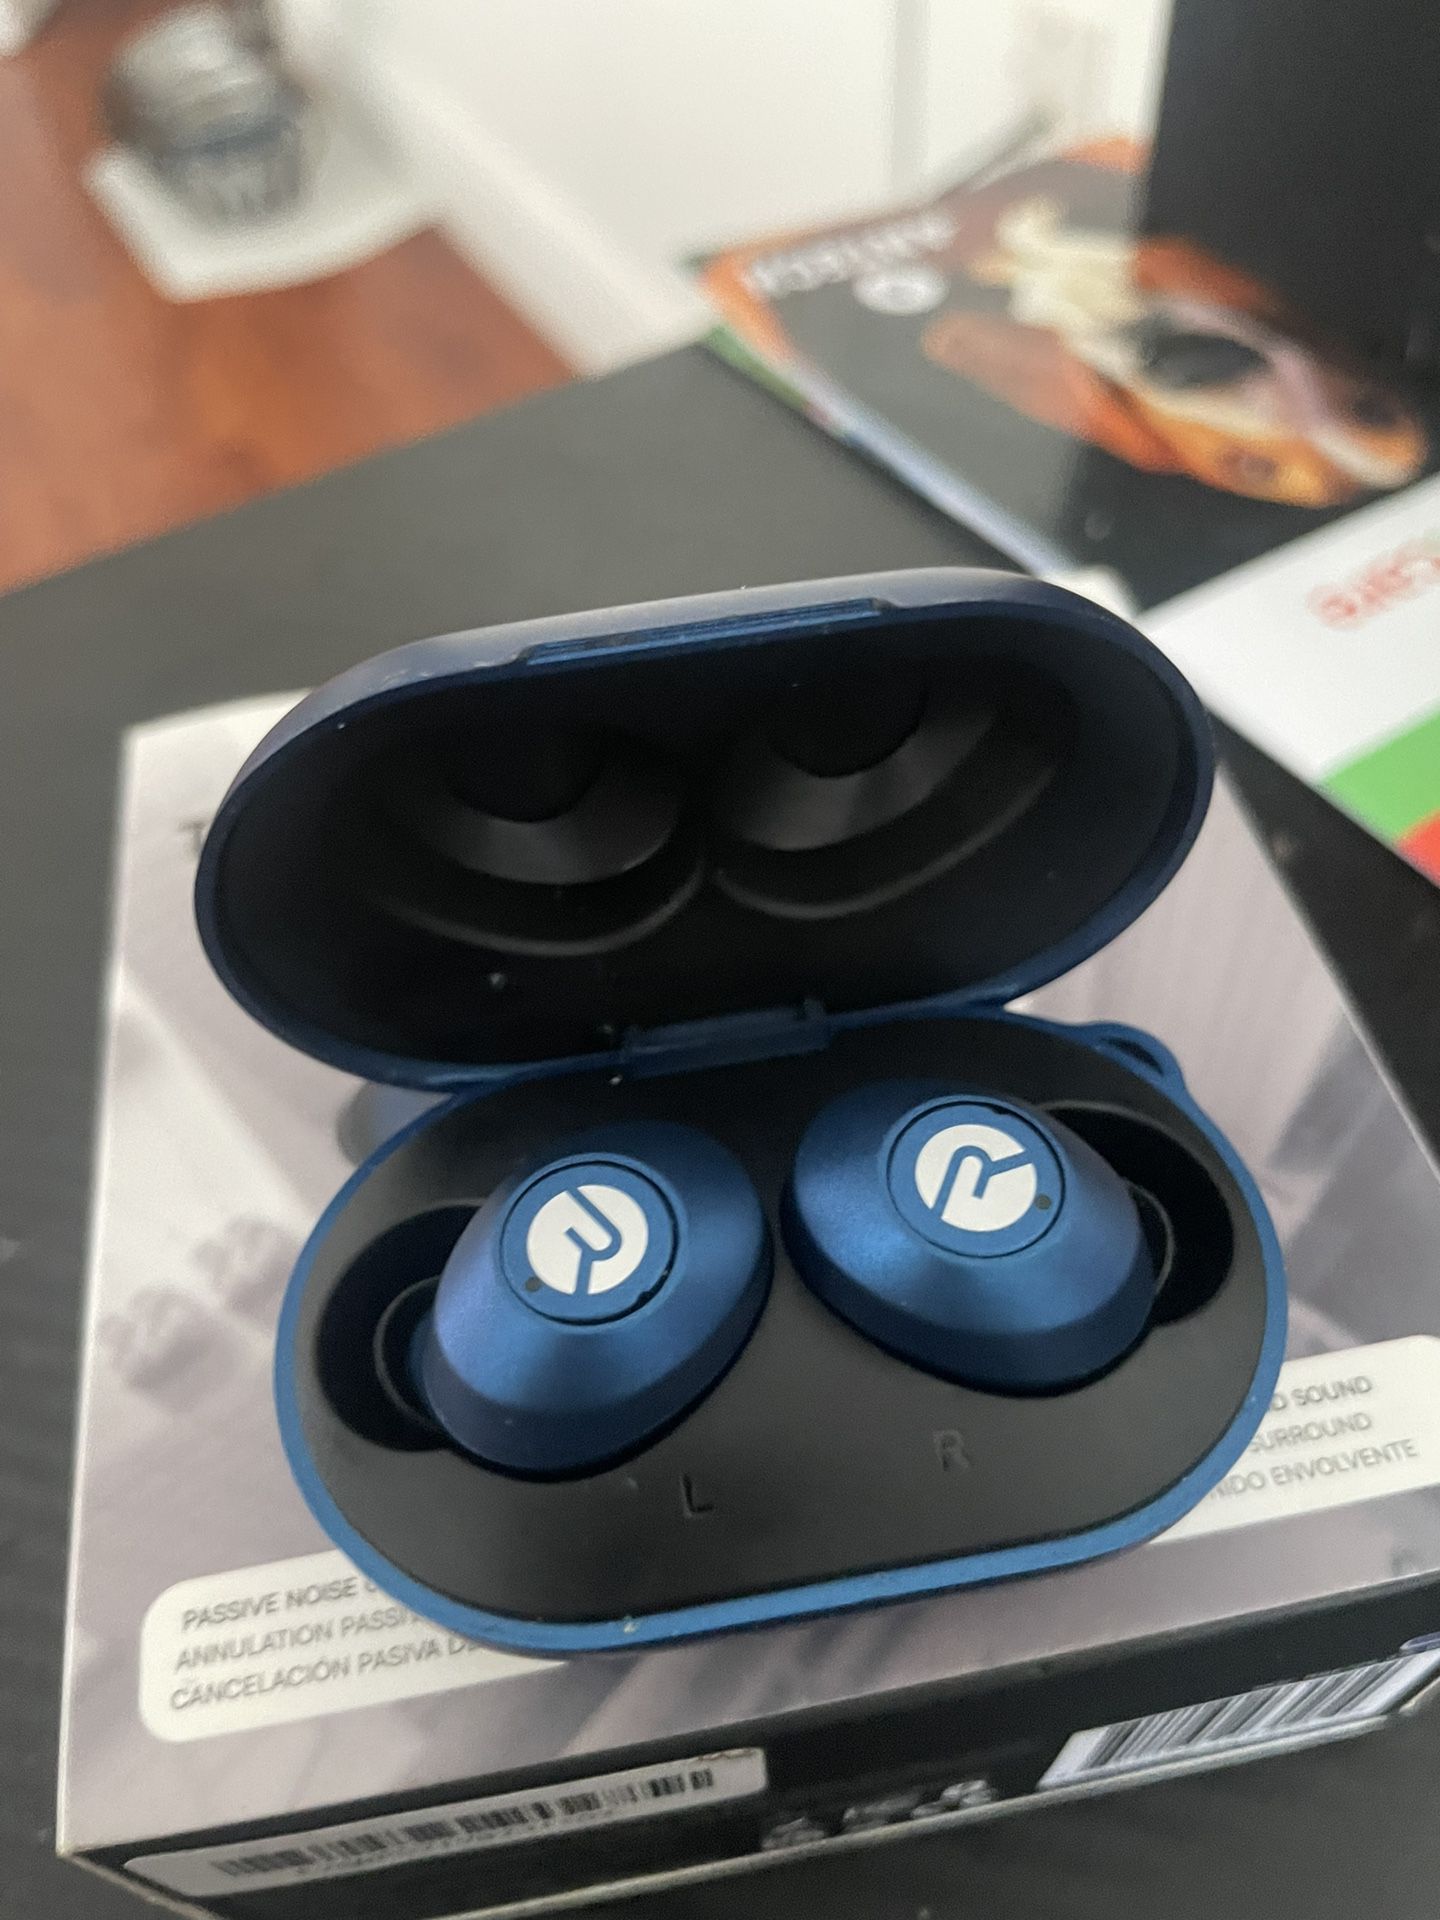 Raycon Earbuds